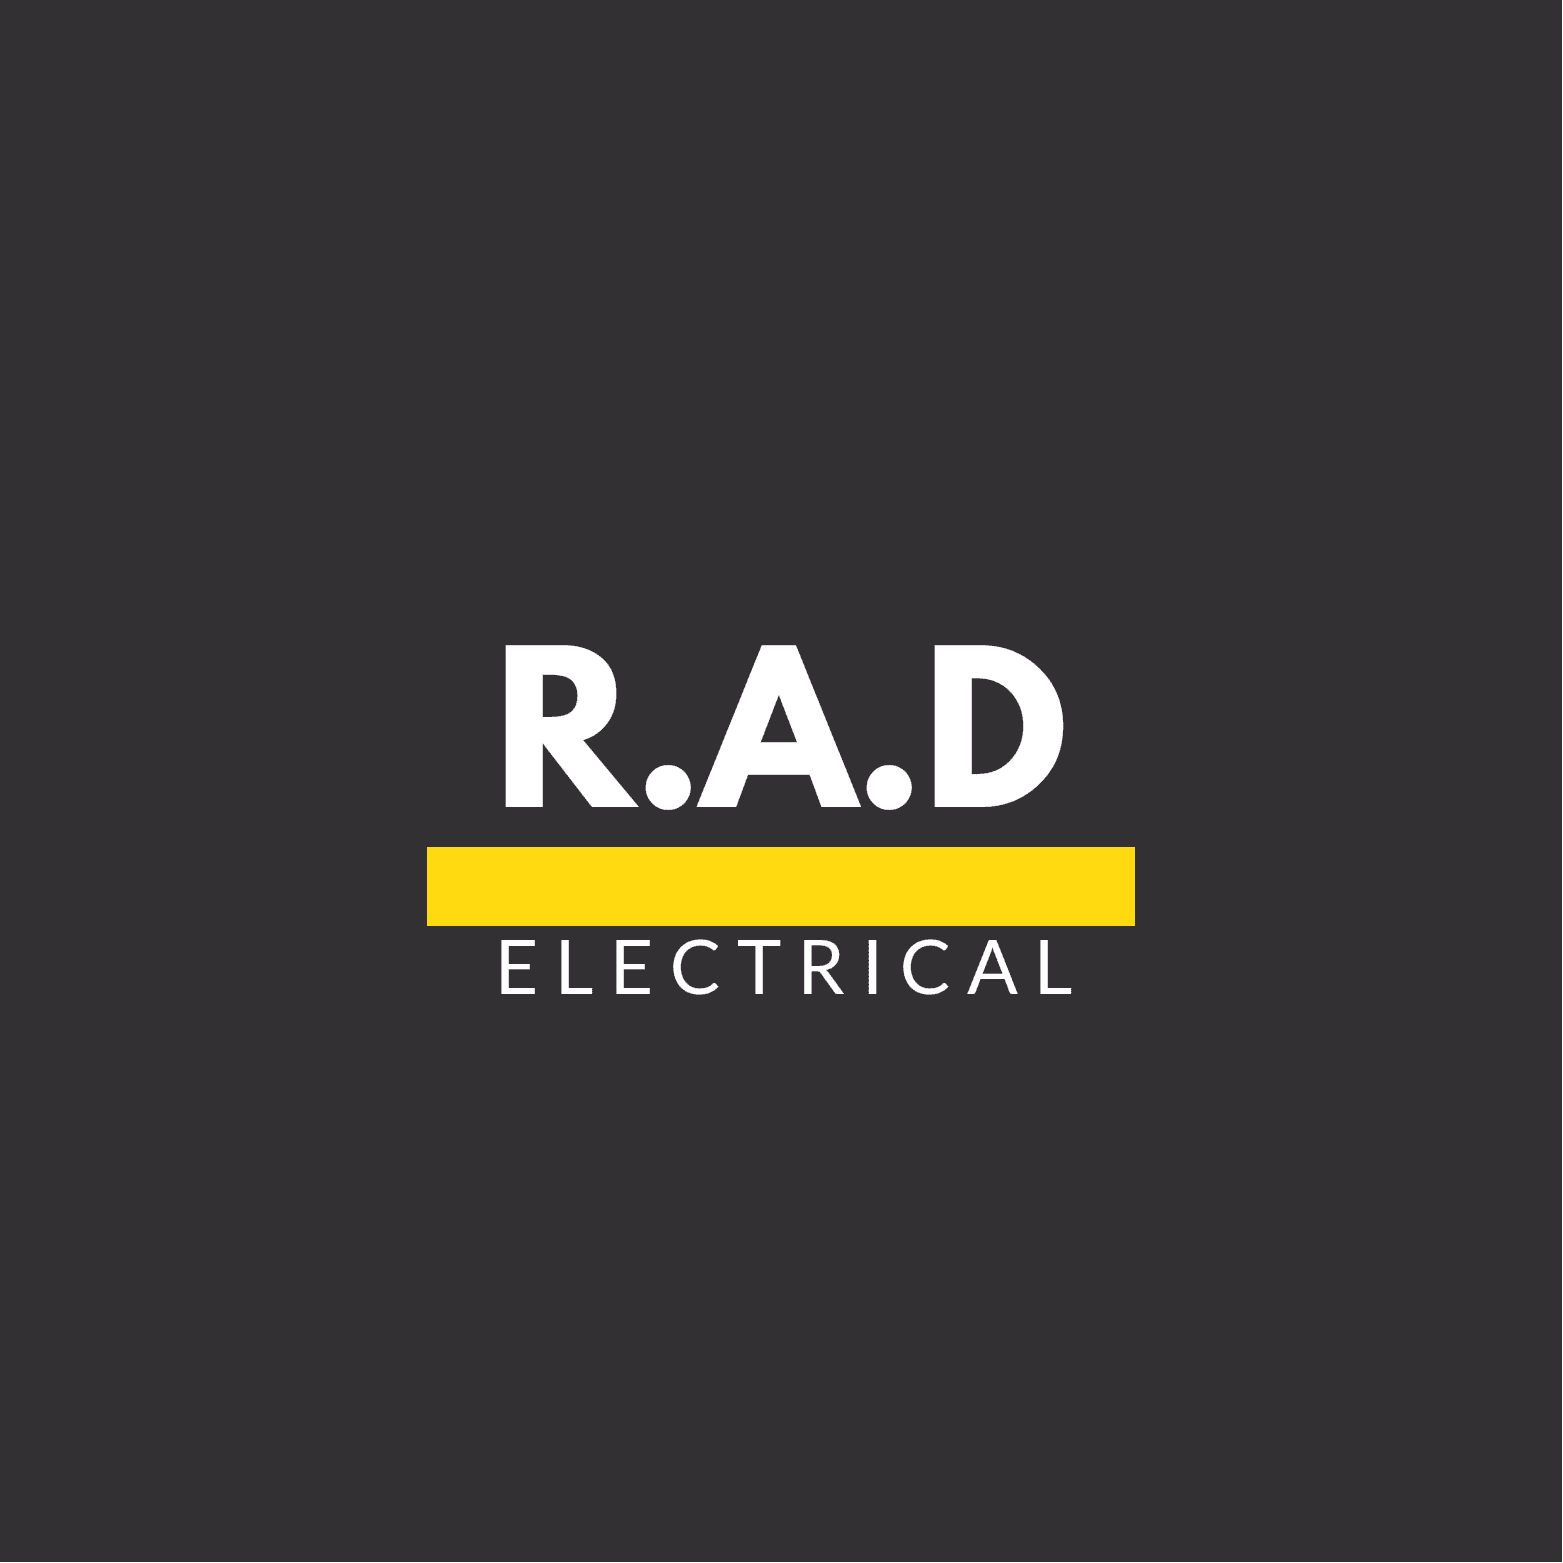 R.A.D Electrical